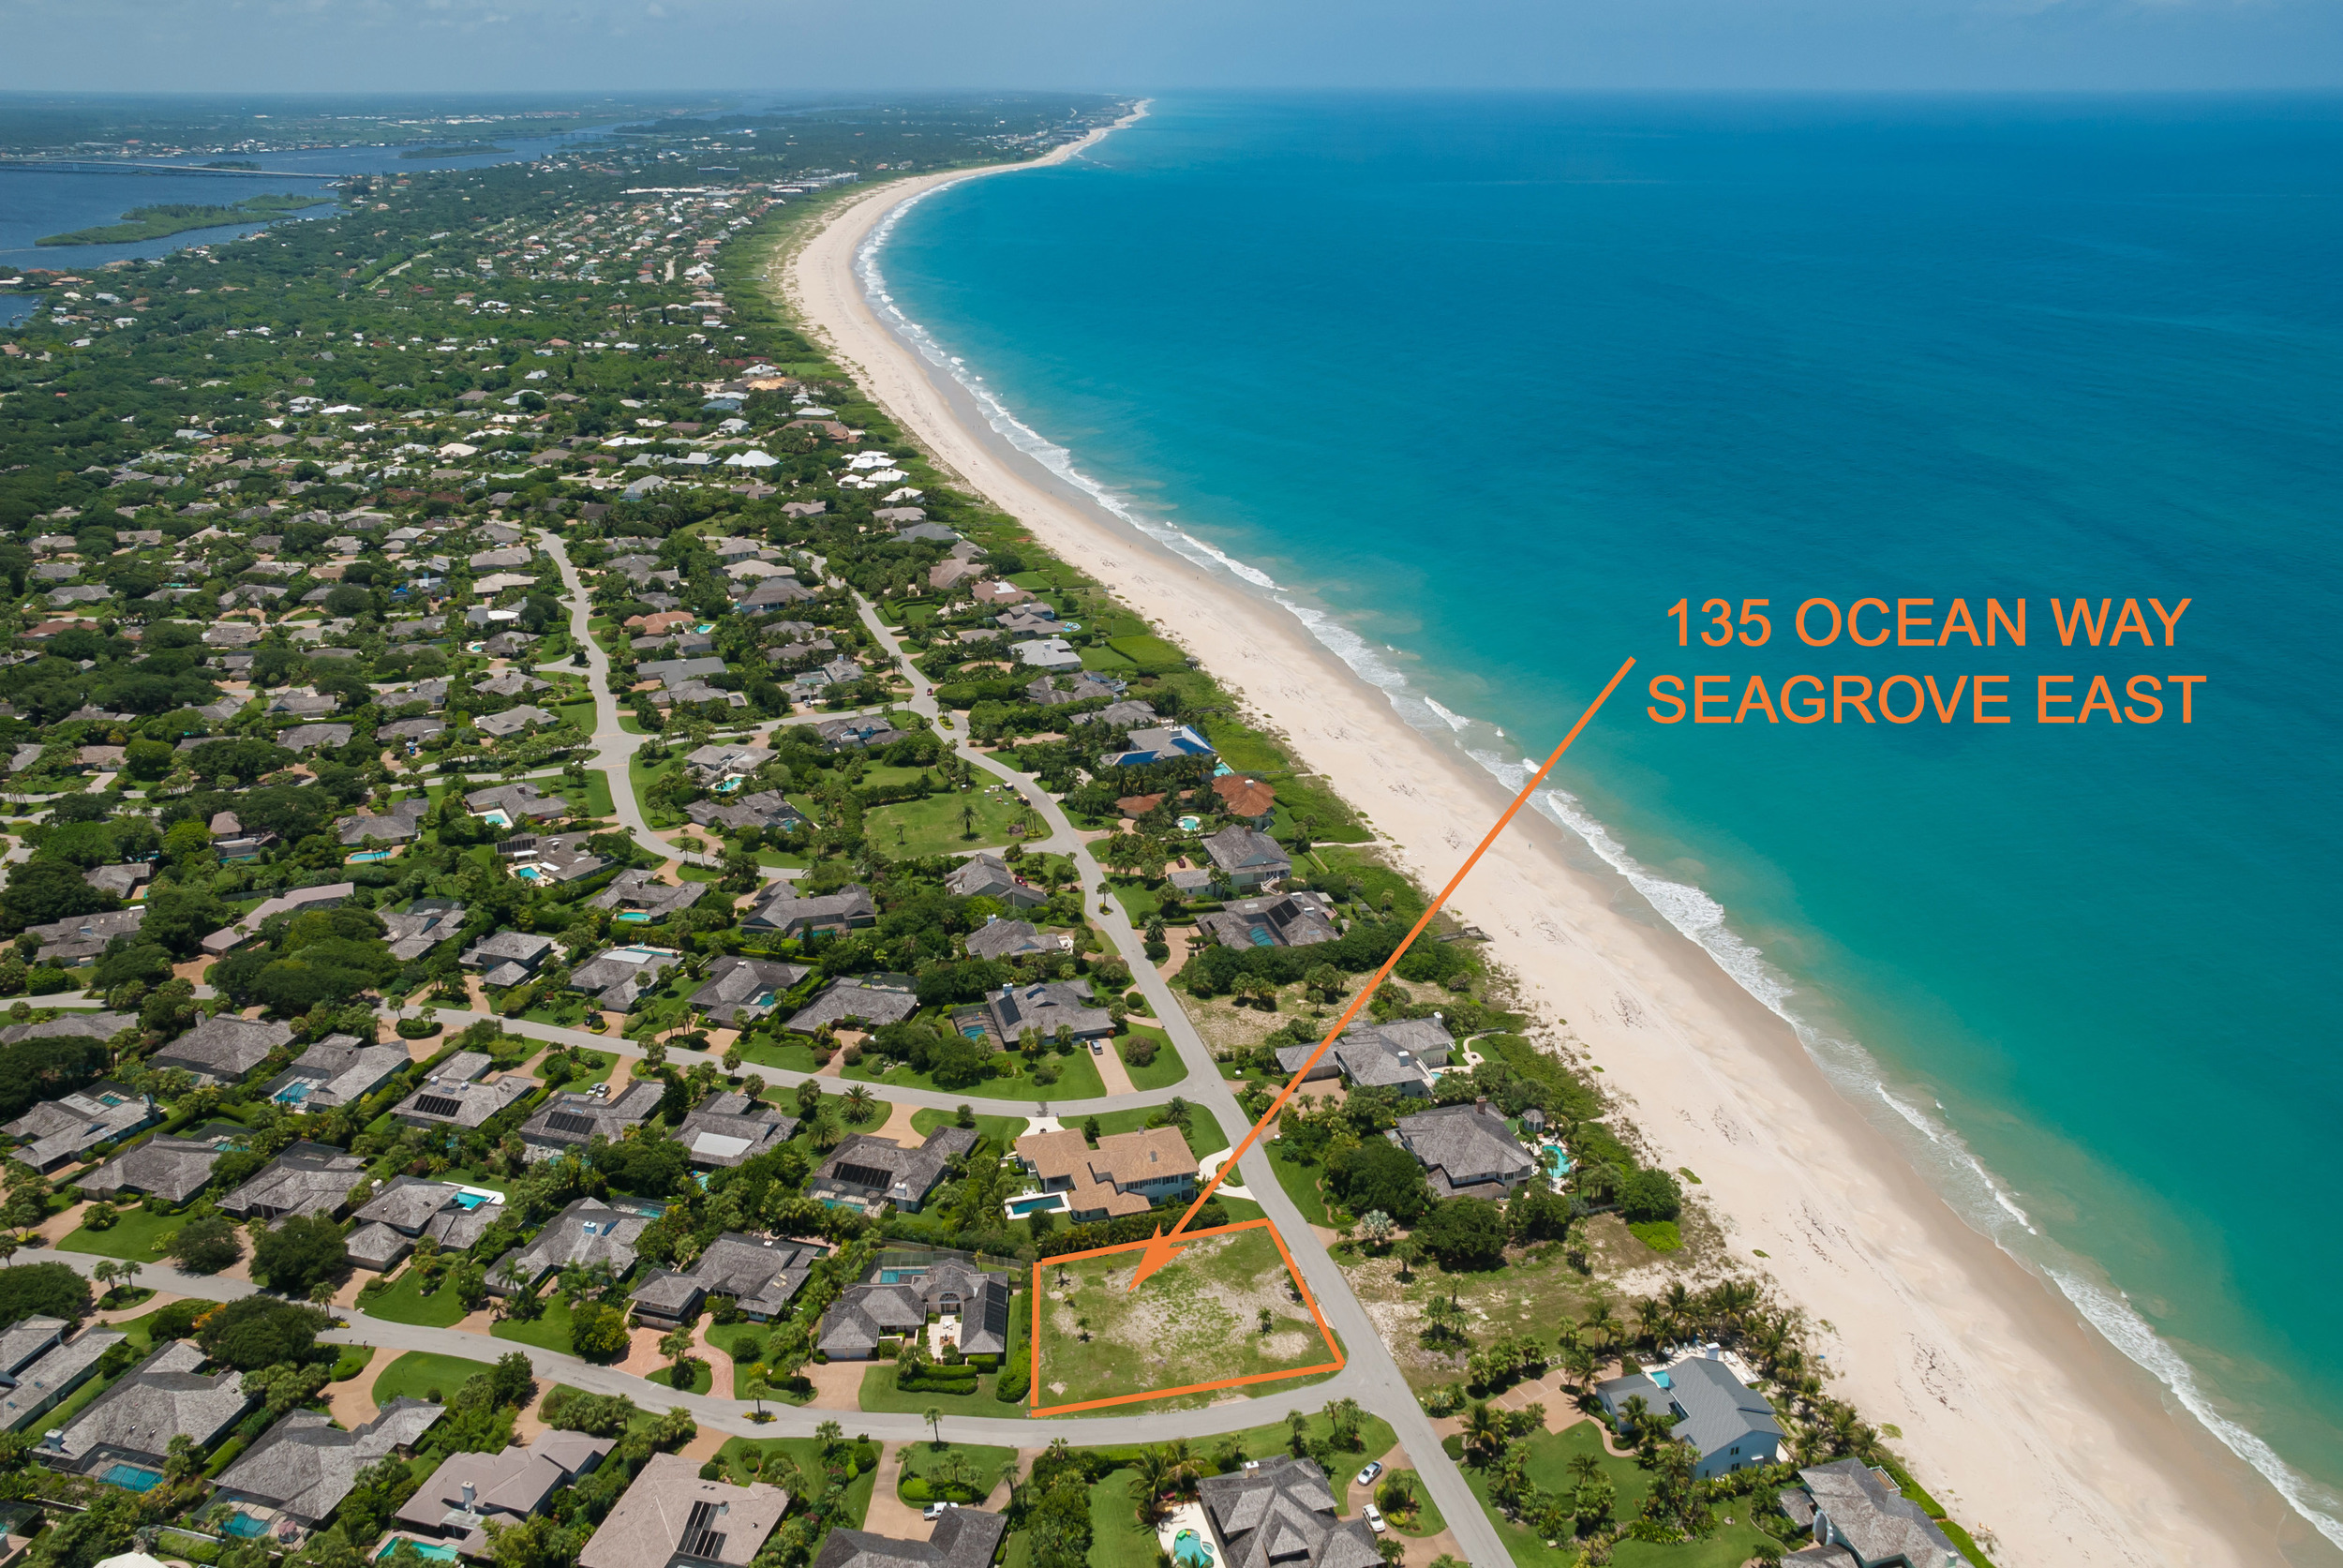 Aerial image illustrating the location of 135 Ocean Way and its proximity to the Atlantic Coastline